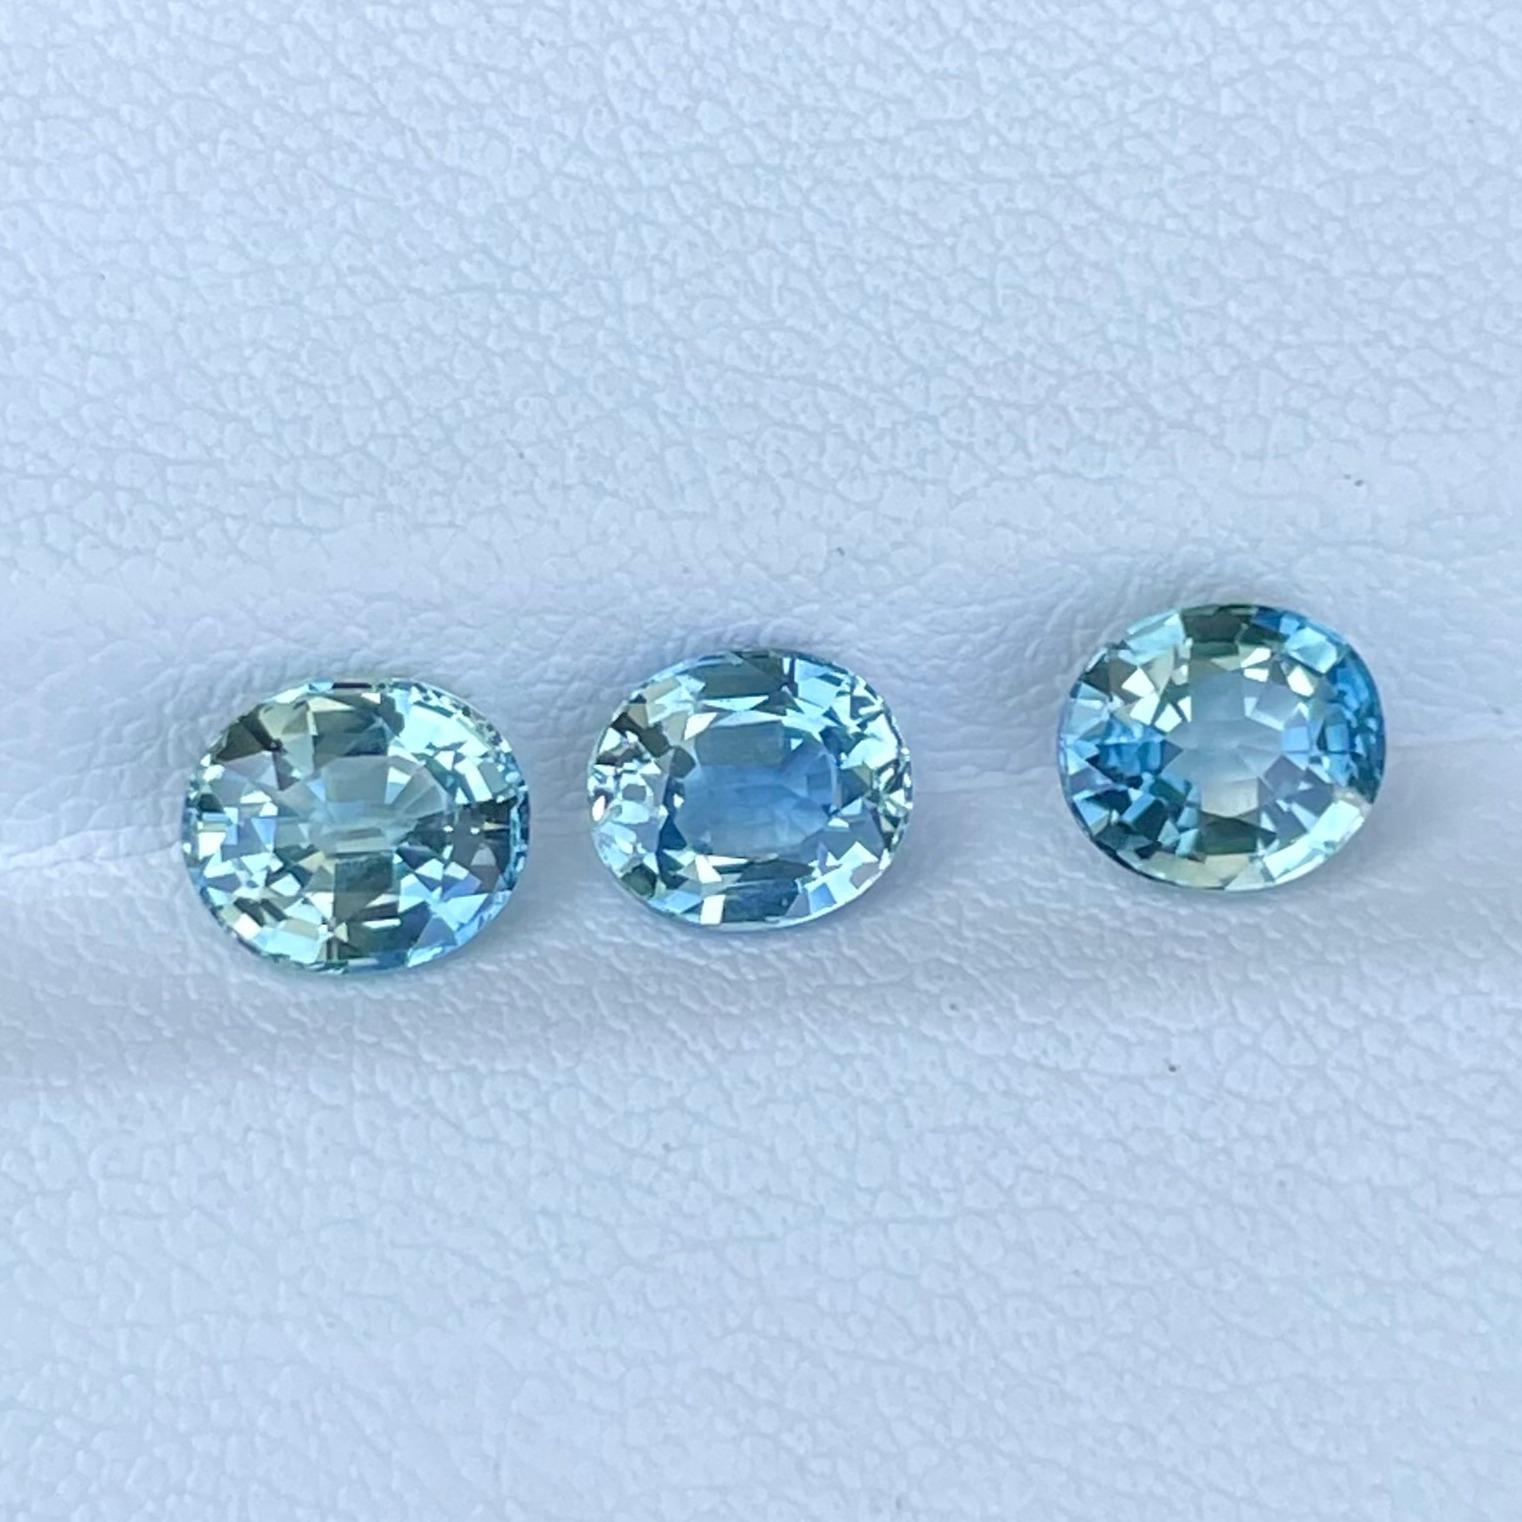 Weight 3.55 carats 

Single piece 
Weight 1.30 carats 
Dimensions 6.8x5.8x3.8 mm

Pair 
Weight 2.30 carats 
Dimensions 6.4x5.6x3.6 mm

Clarity: Eye Clean
Treatment: Heat
Origin: Sri lanka
Shape: Oval
Cut: Step Oval





Indulge in the timeless